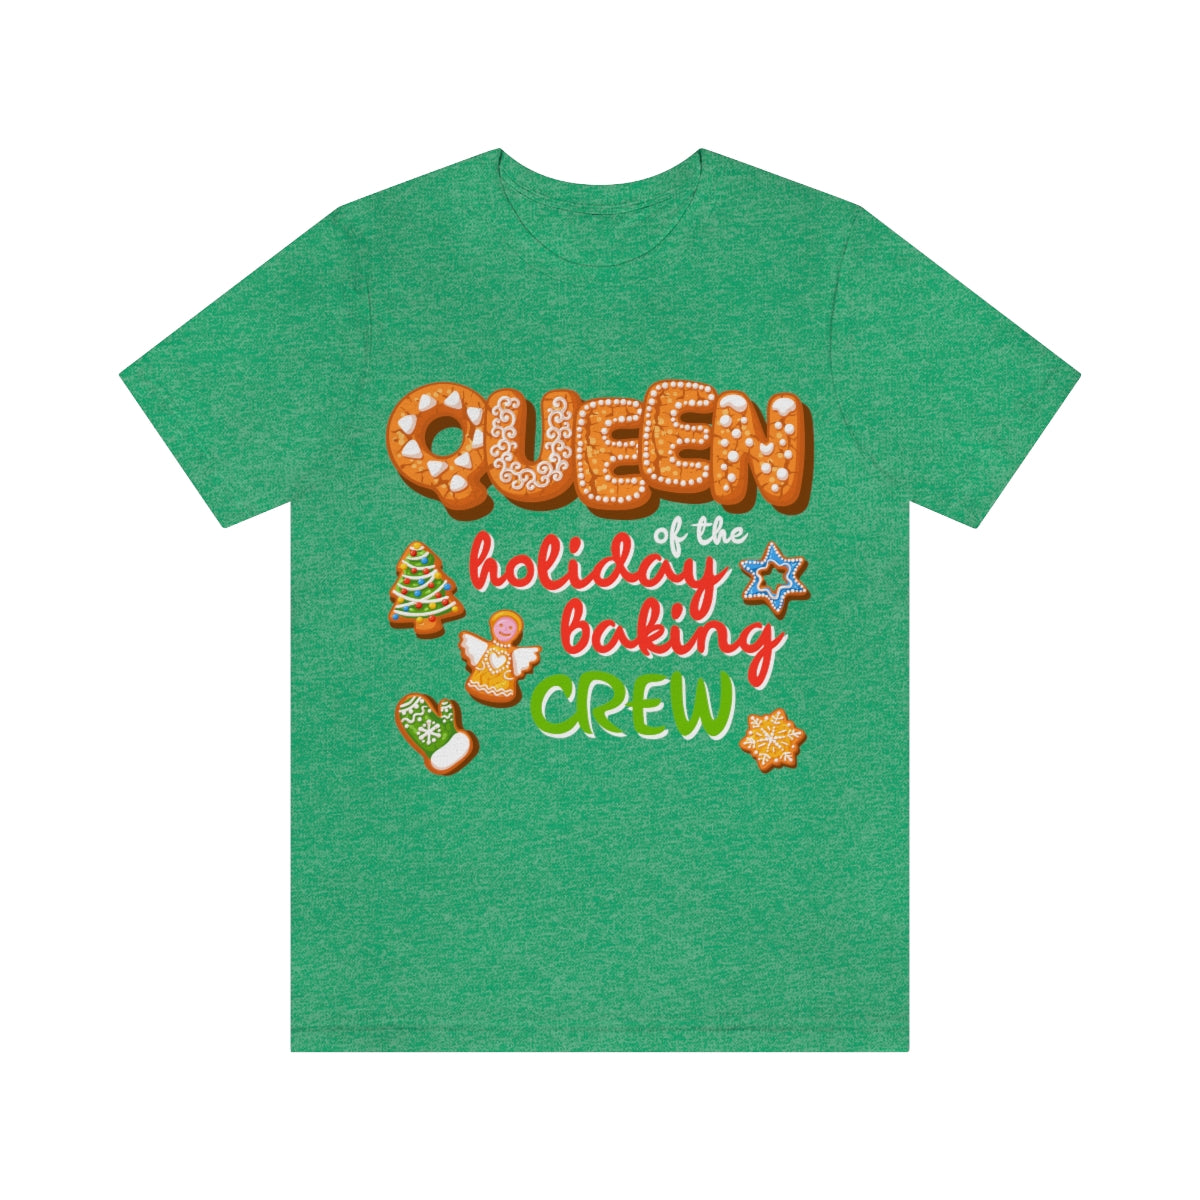 Queen of the holiday baking crew - Family Matching Funny Christmas T-shirts for women or men - 37 Design Unit